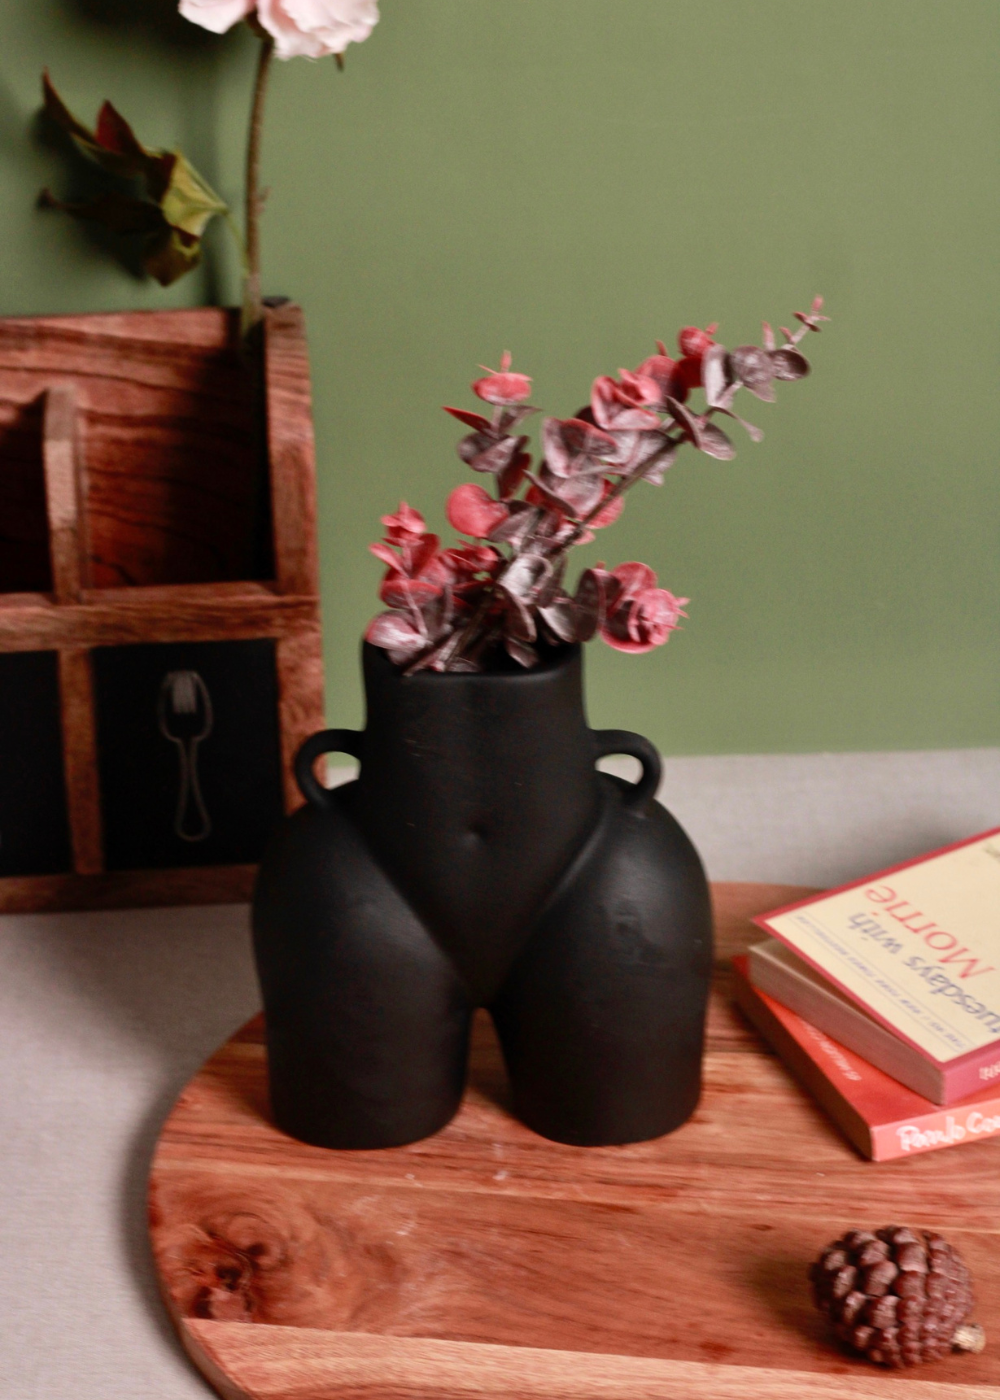 Black body vase with pink flowers on a wooden surface